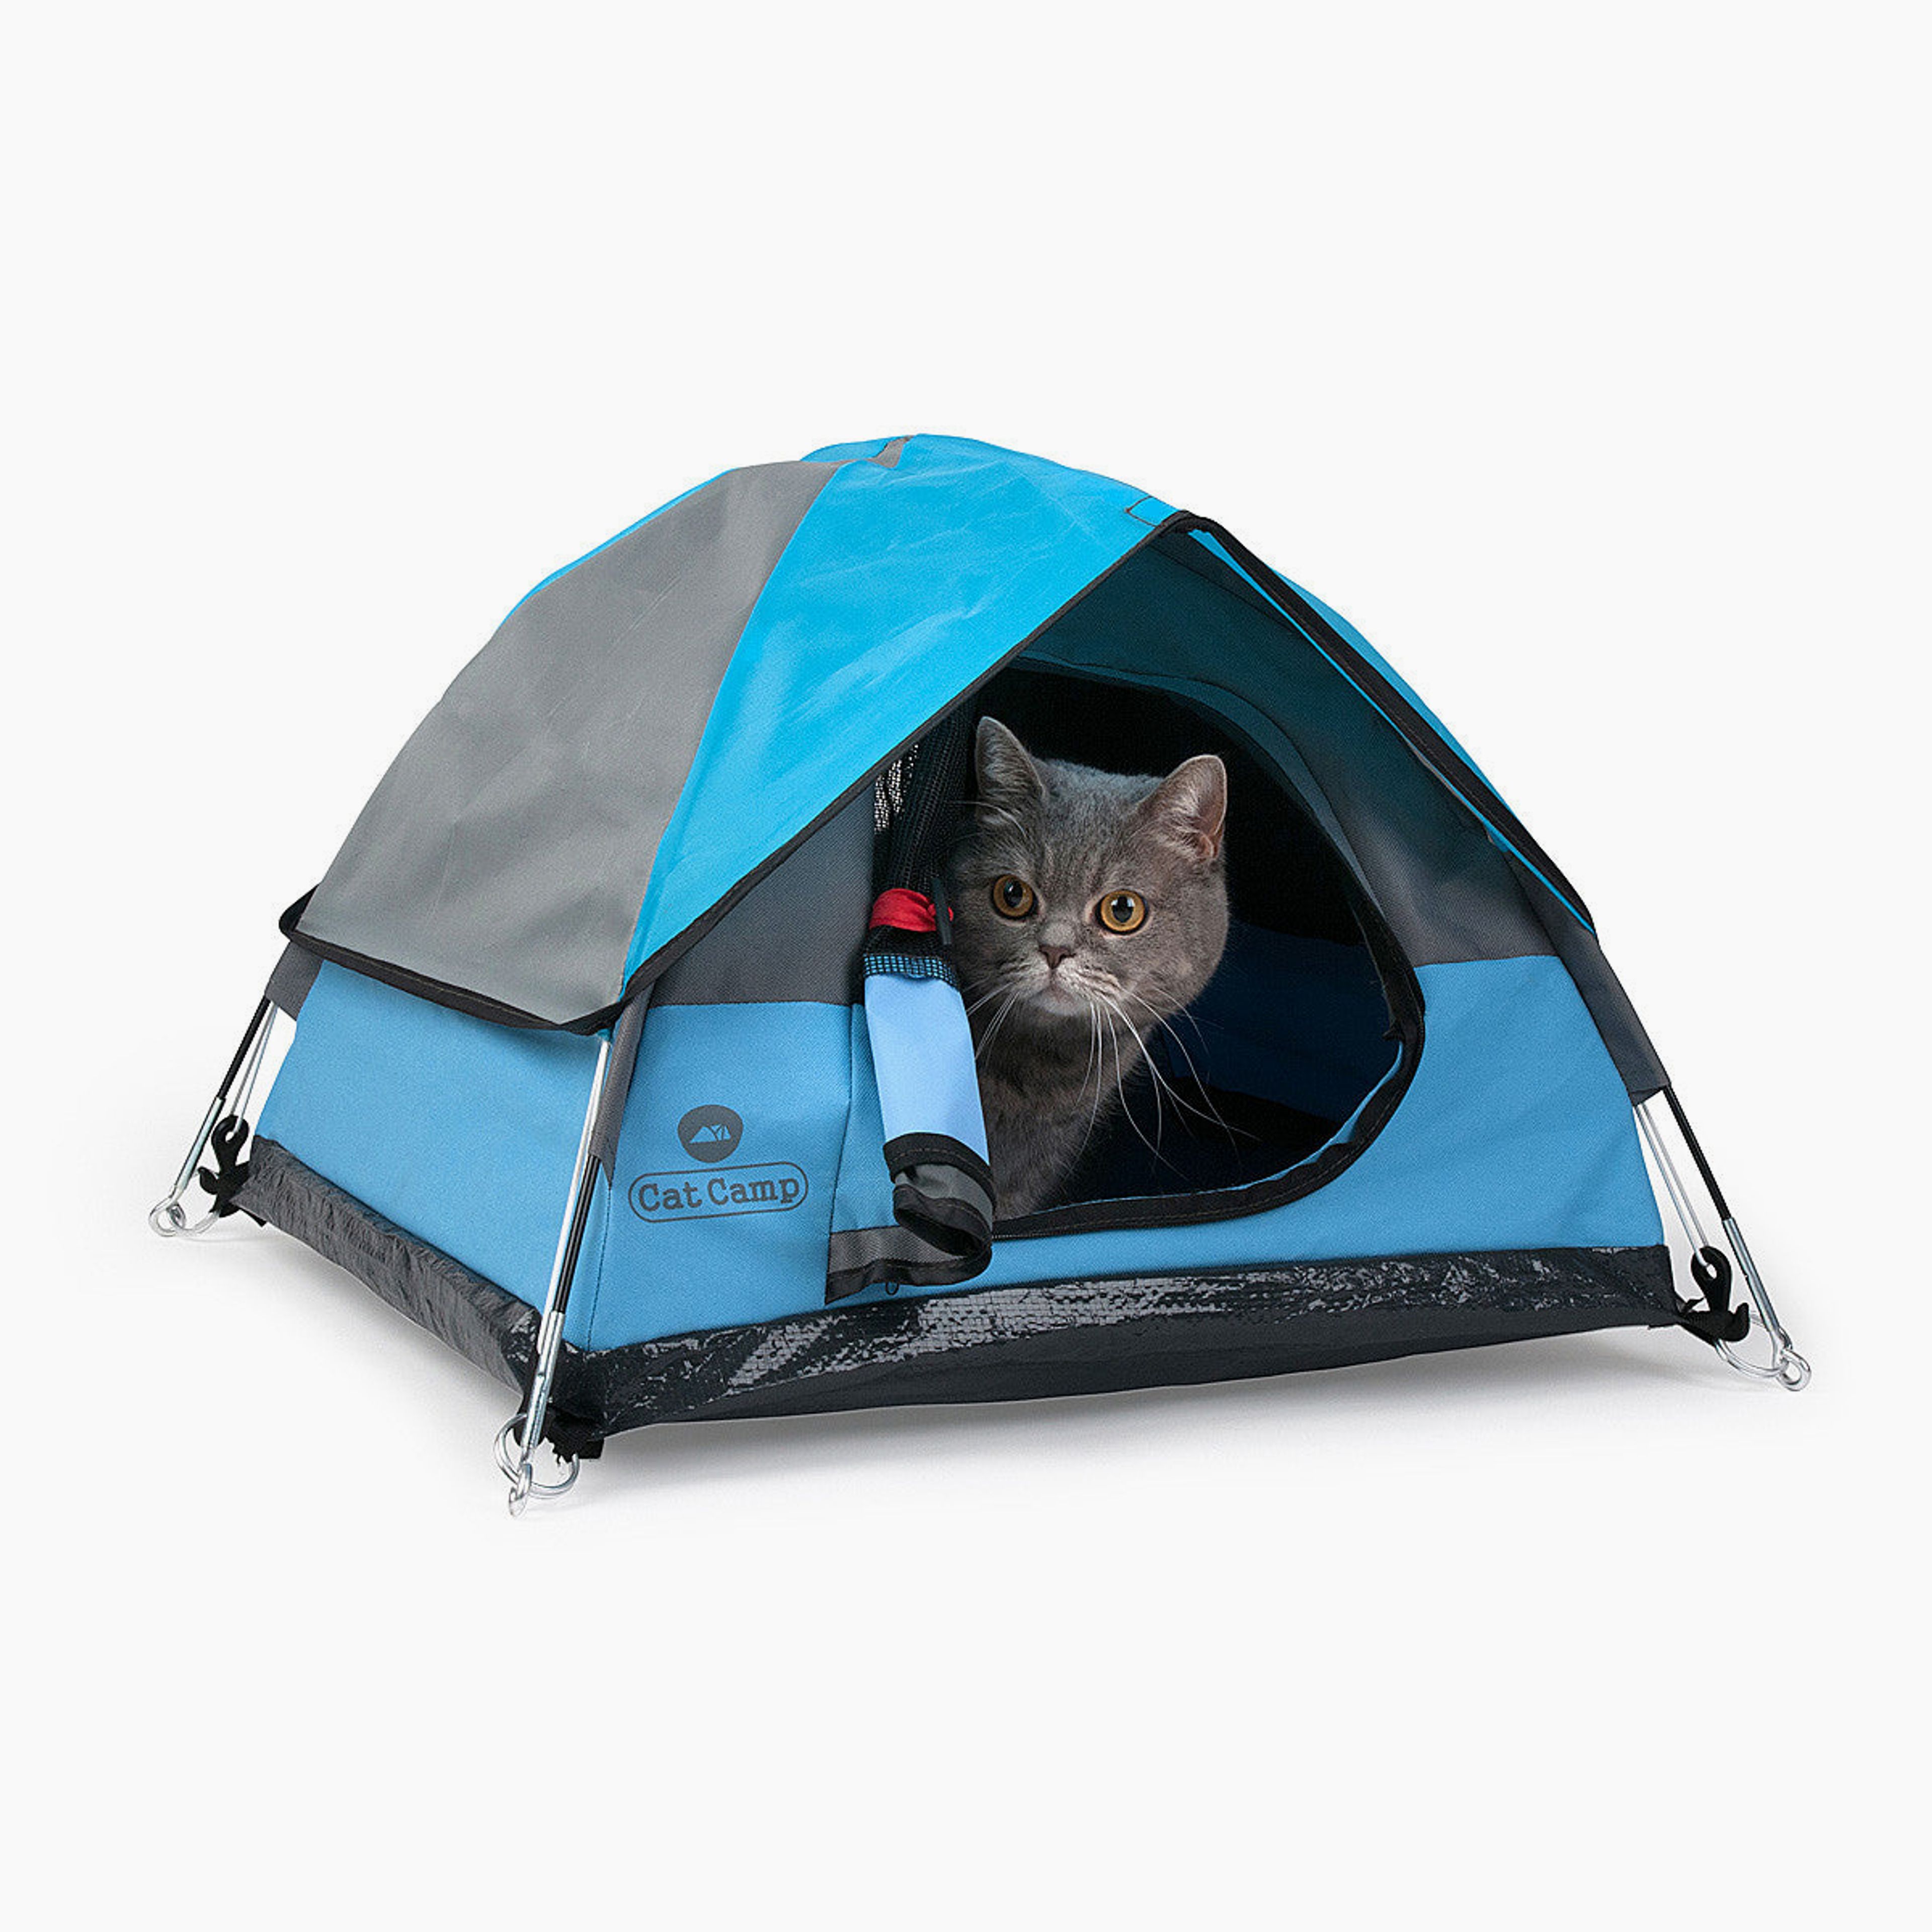 Cat Camp - The teeny tiny tent for indoor cats